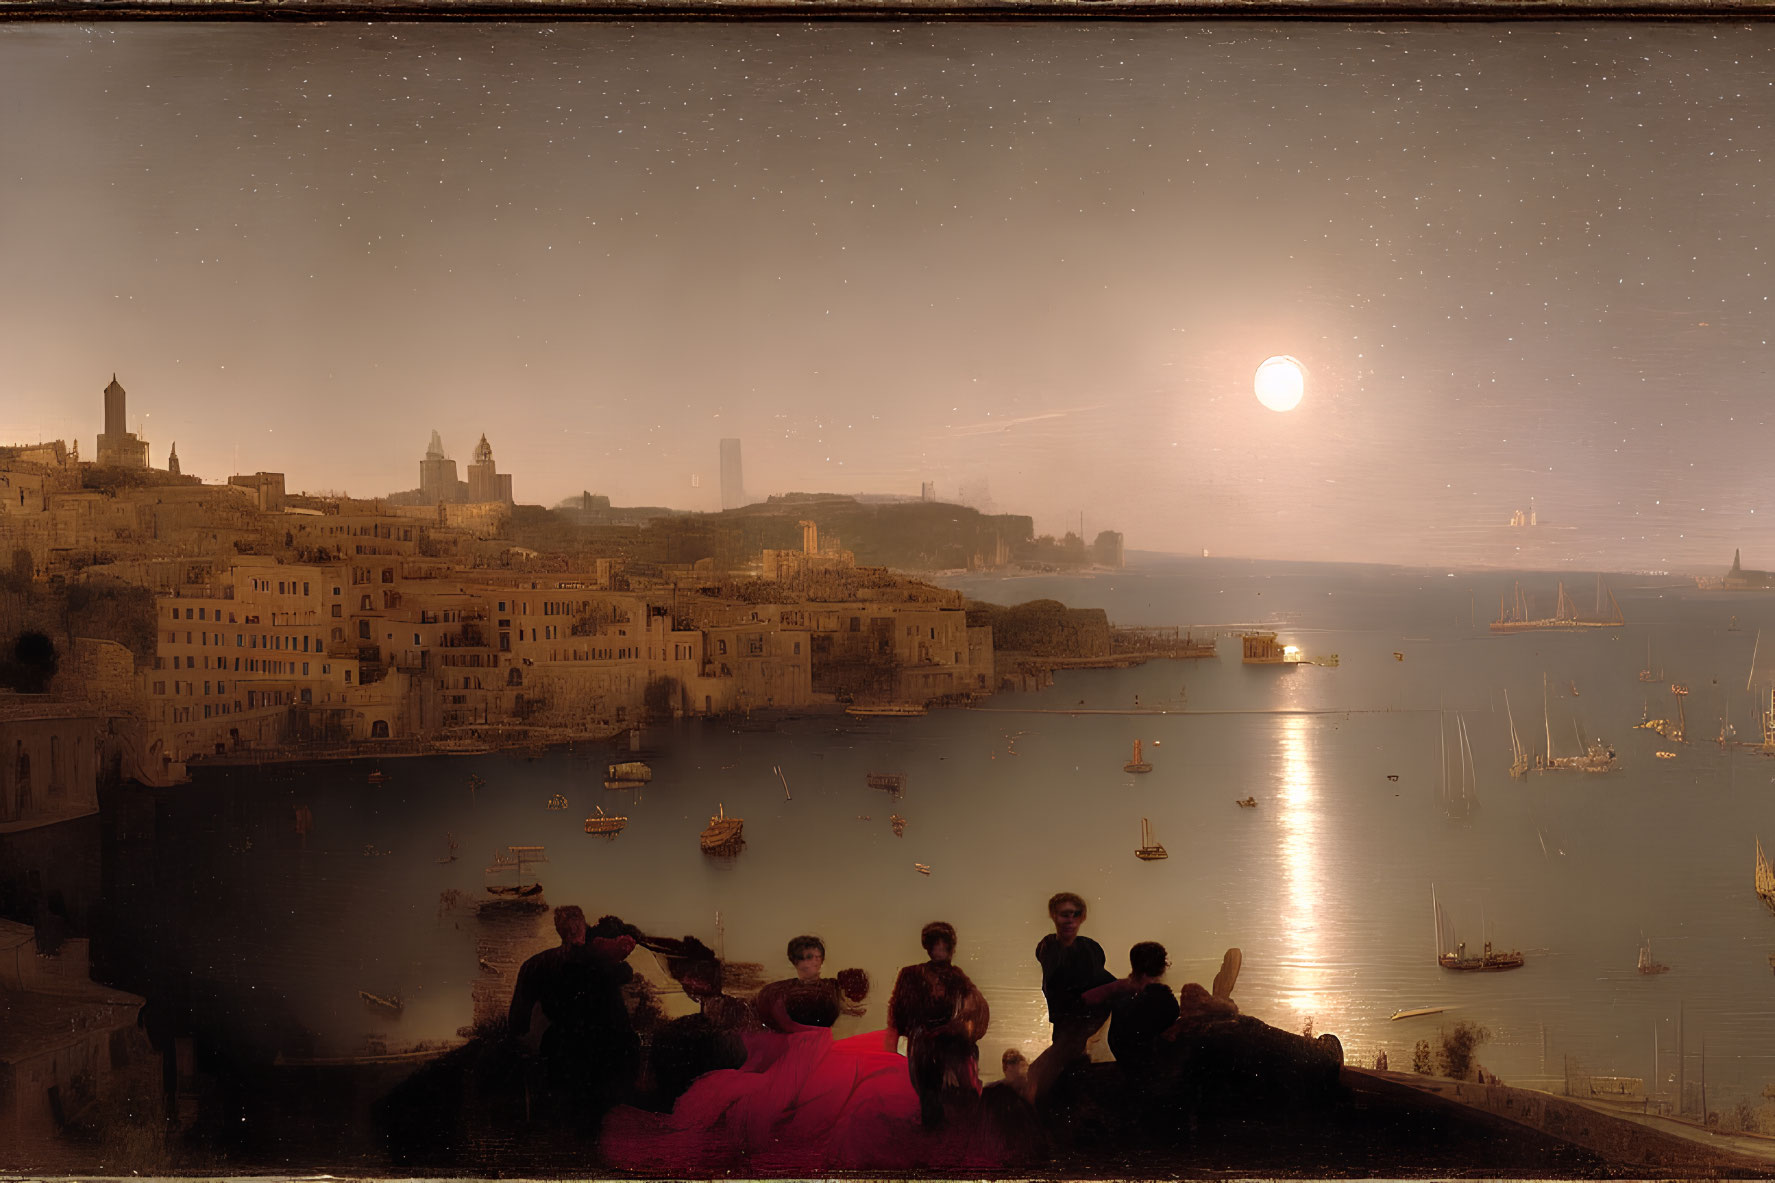 People admiring moonlit harbor with boats, calm water, illuminated town, and starry sky